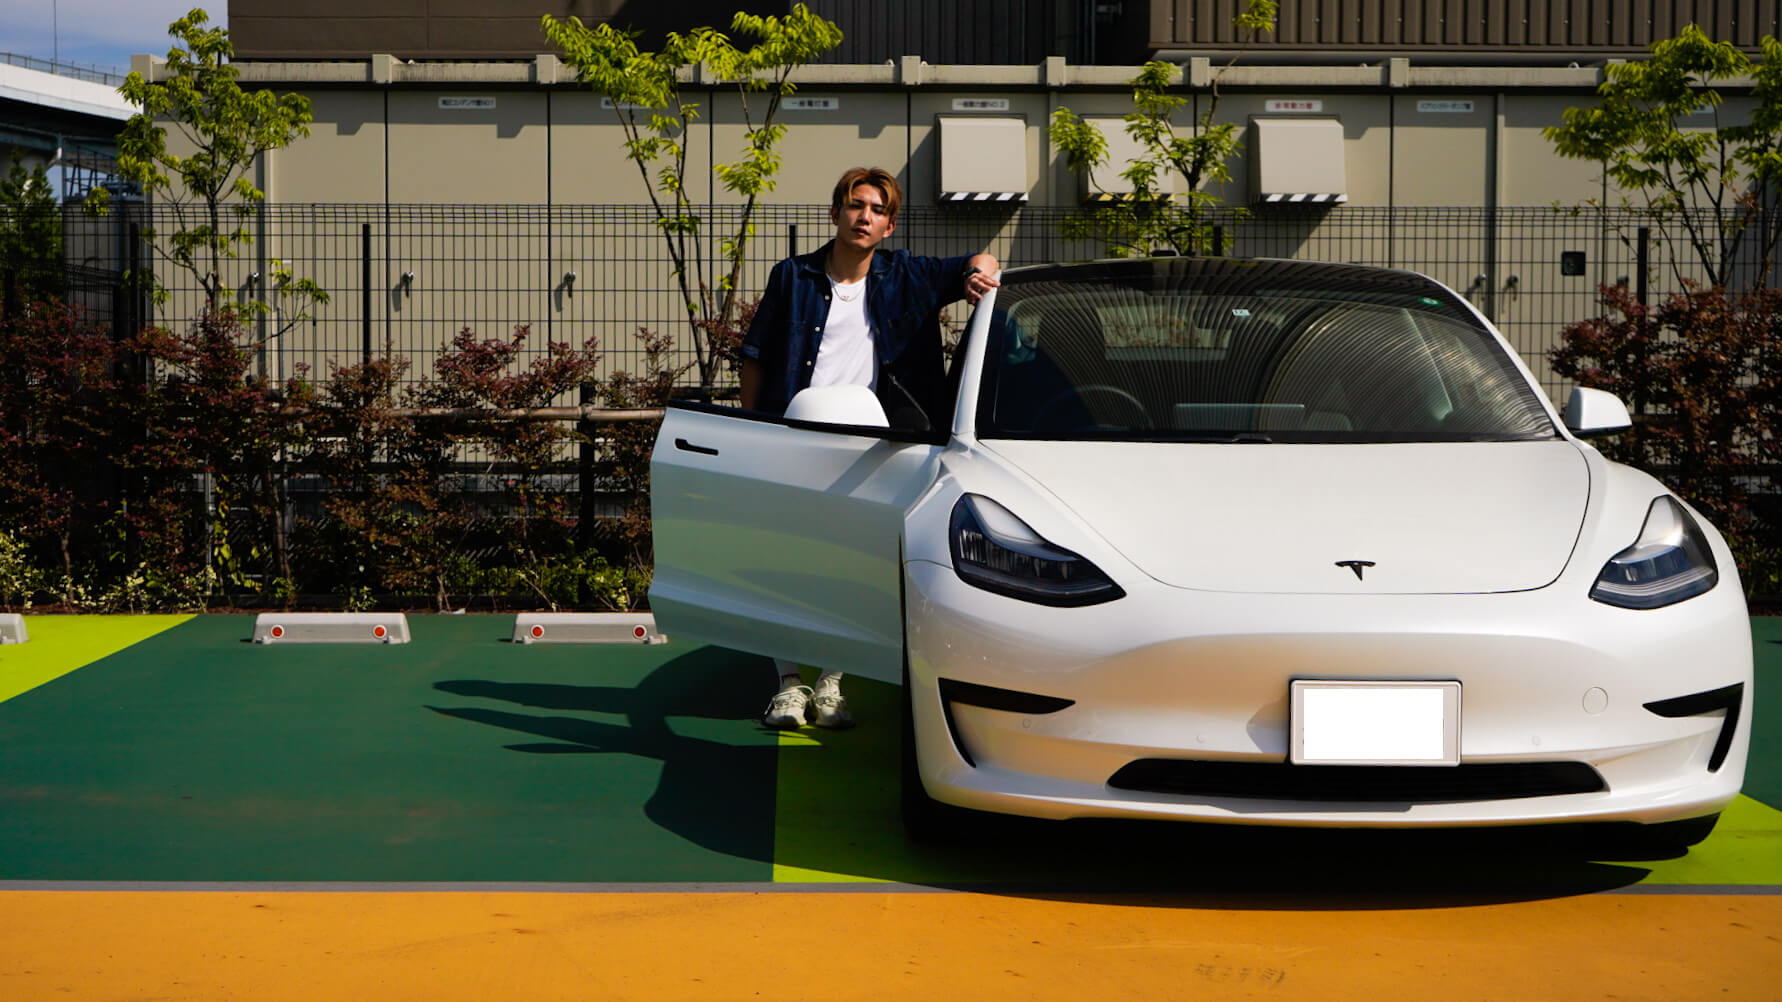 A Tesla owner standing next to a white Model 3 with the driver's door open in a parking lot